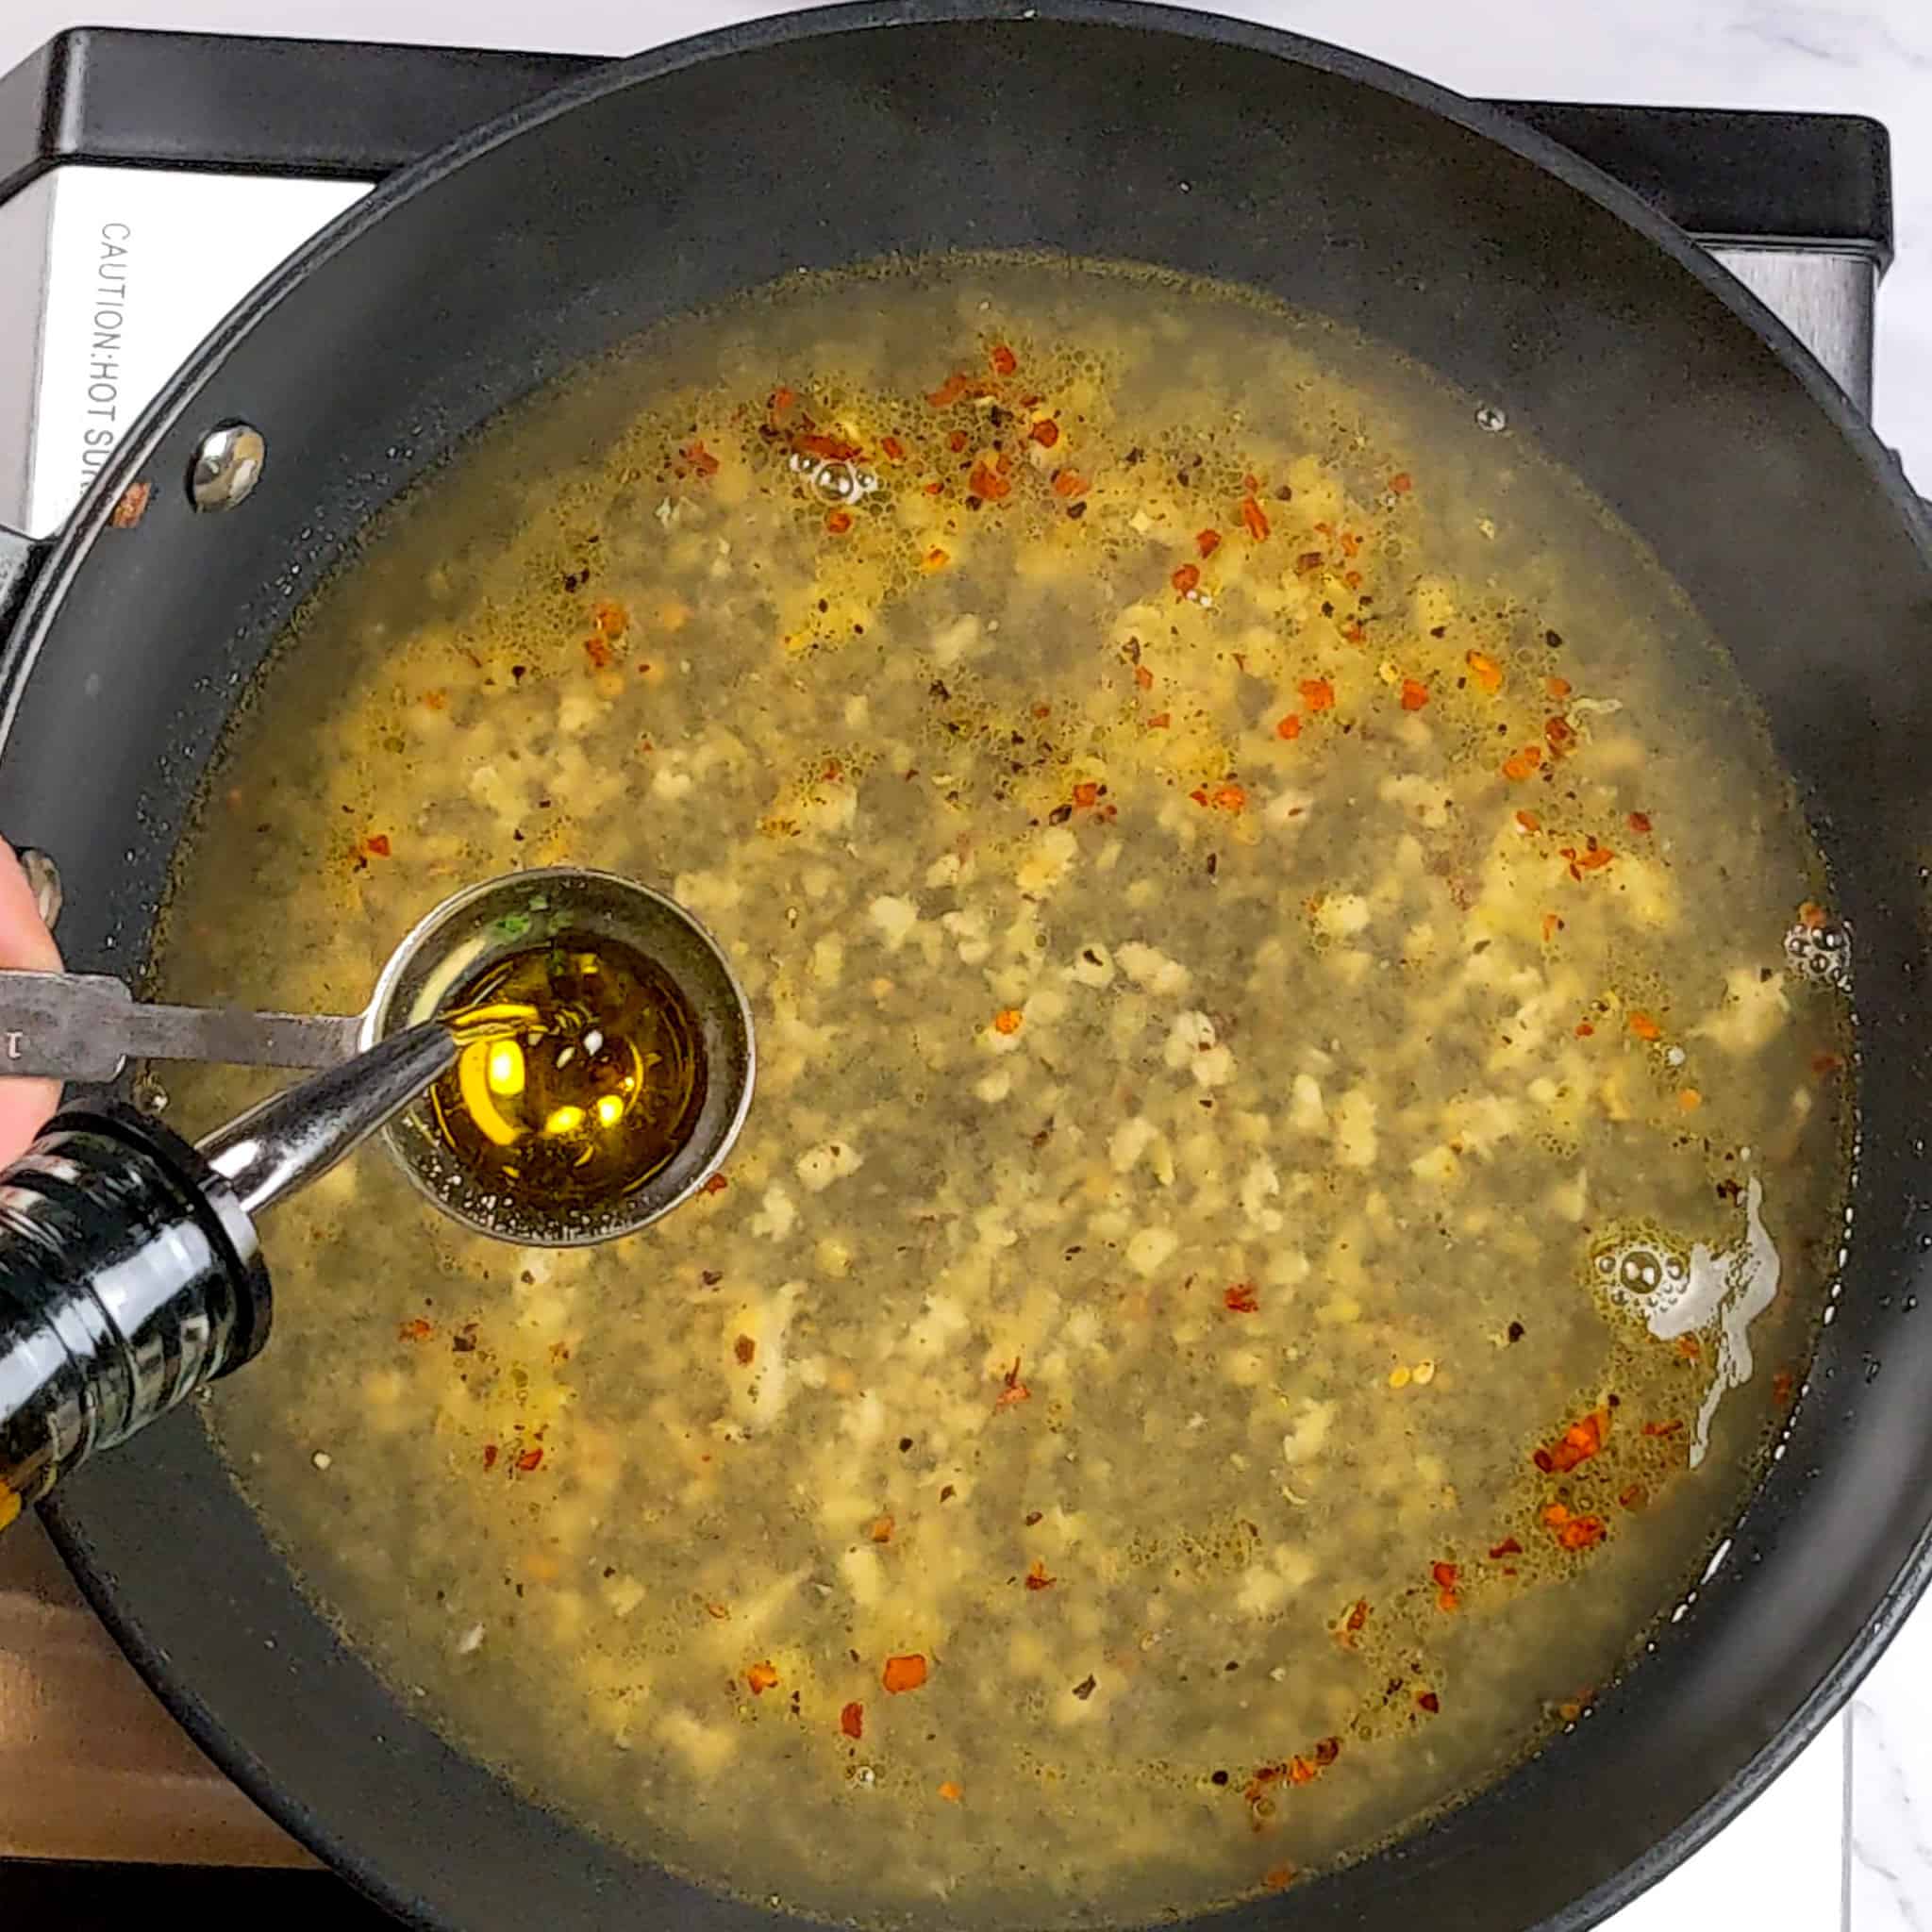 olive oil being poured in a 1 tablespoon measuring spoon over the unfinished lemon pepper sauce